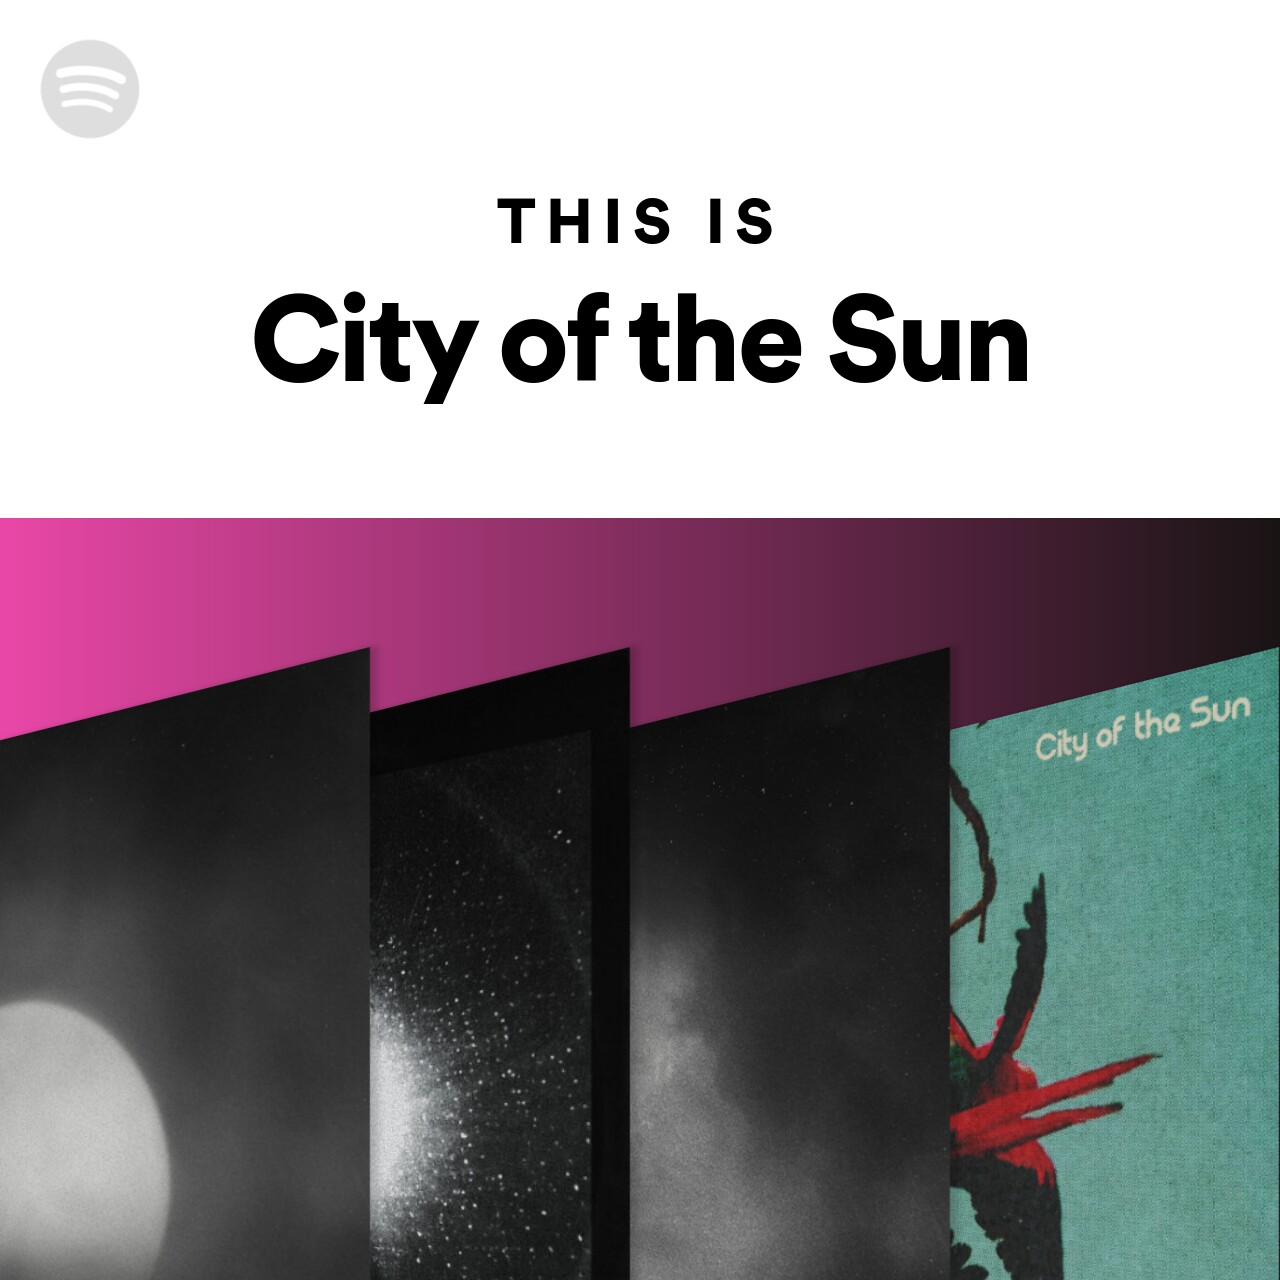 This Is City of the Sun